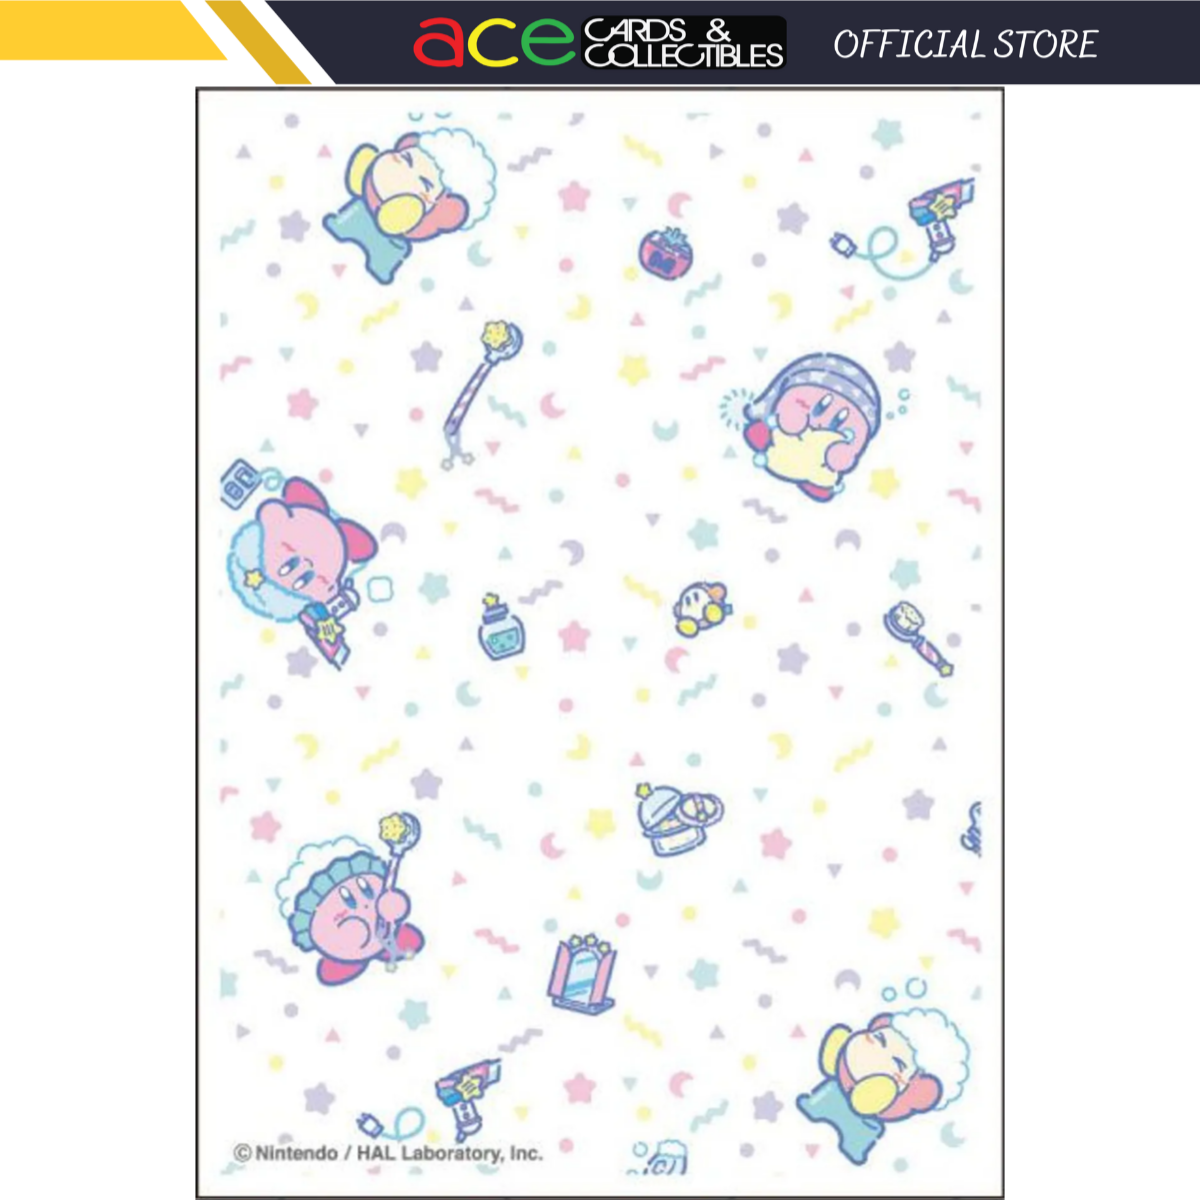 Ensky Character Sleeve - Kirby Horoscope "Pattern" [EN-1221]-Ensky-Ace Cards & Collectibles